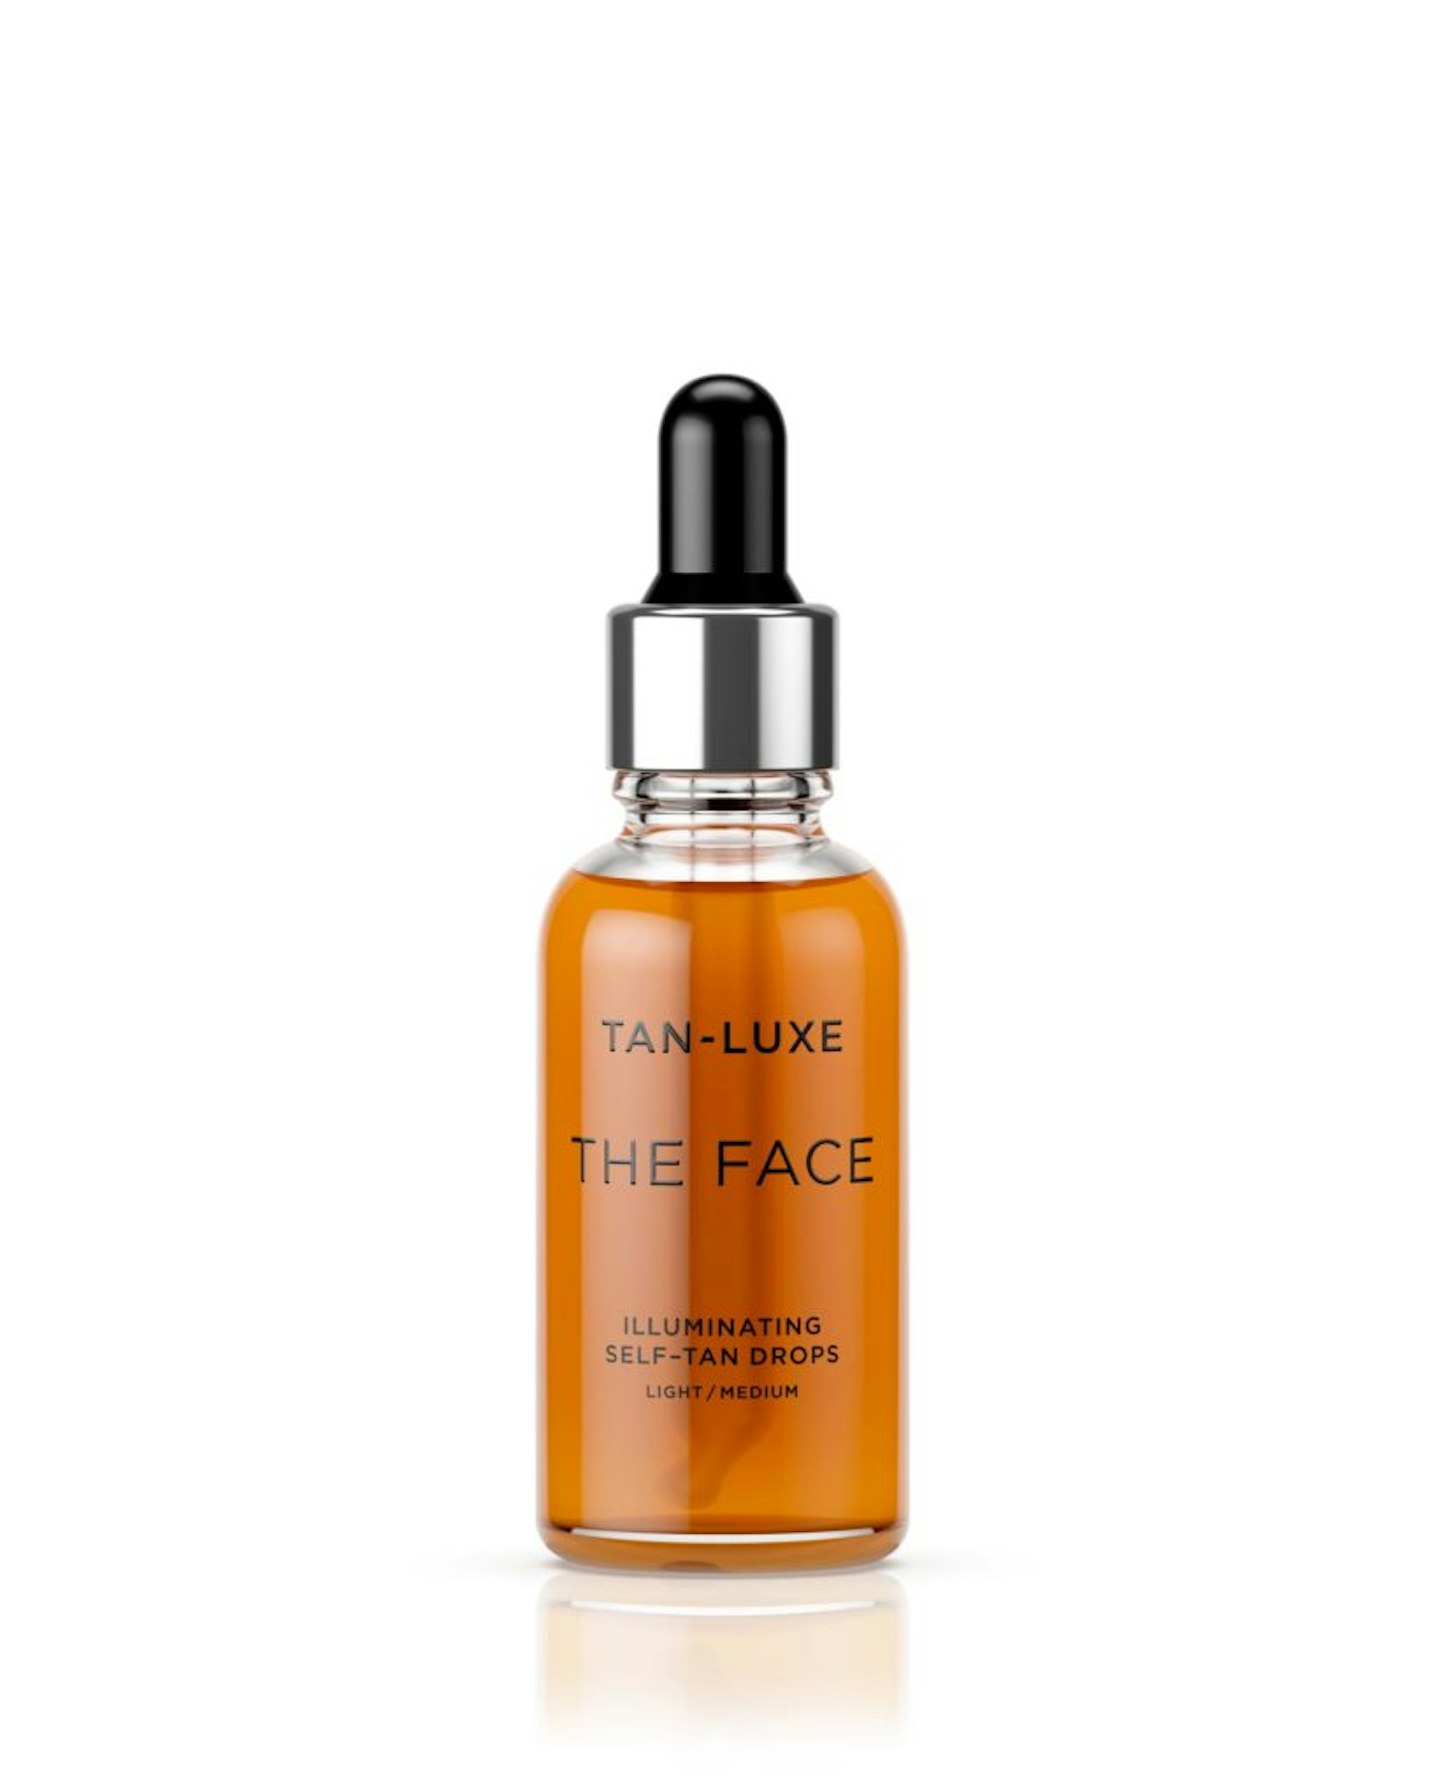 Tan Luxe's The Face Illuminating Self Tanning Drops, £35